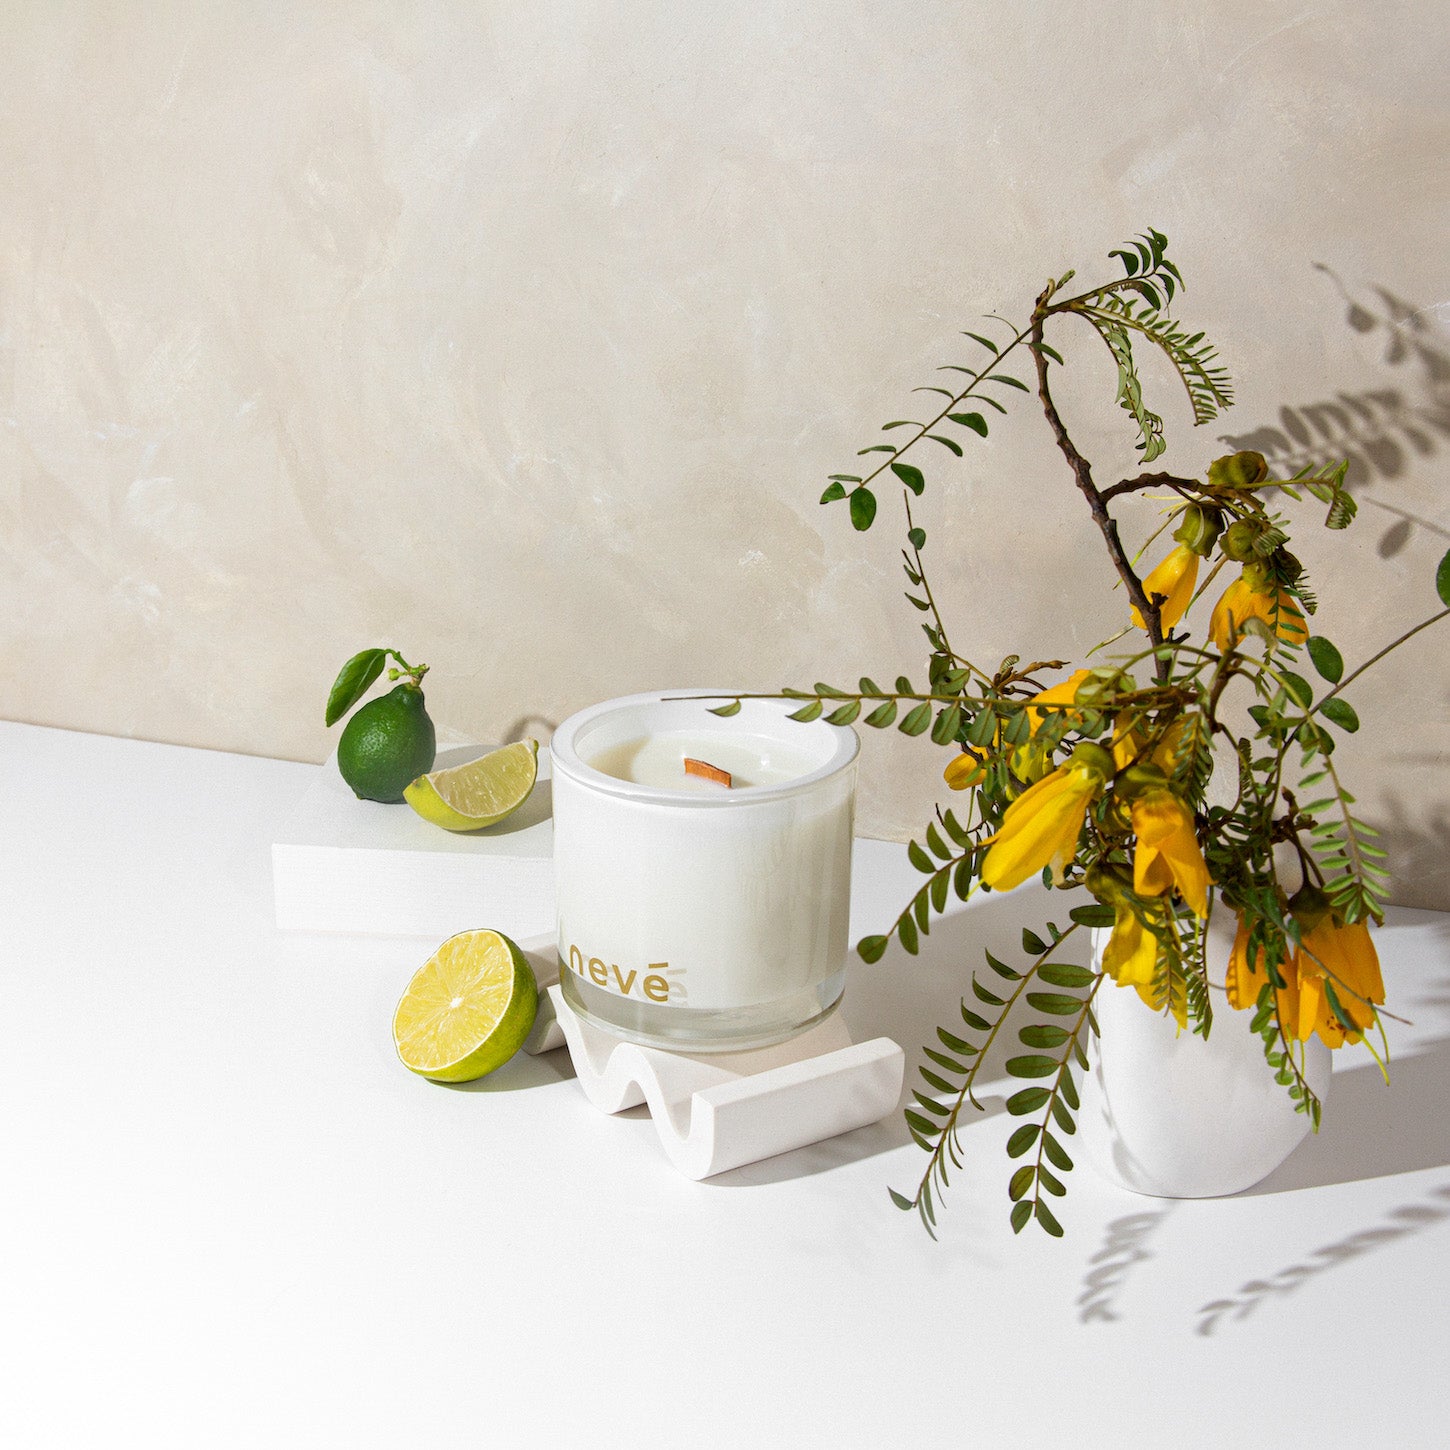 Neve white candle with kowhai blossom branch and limes